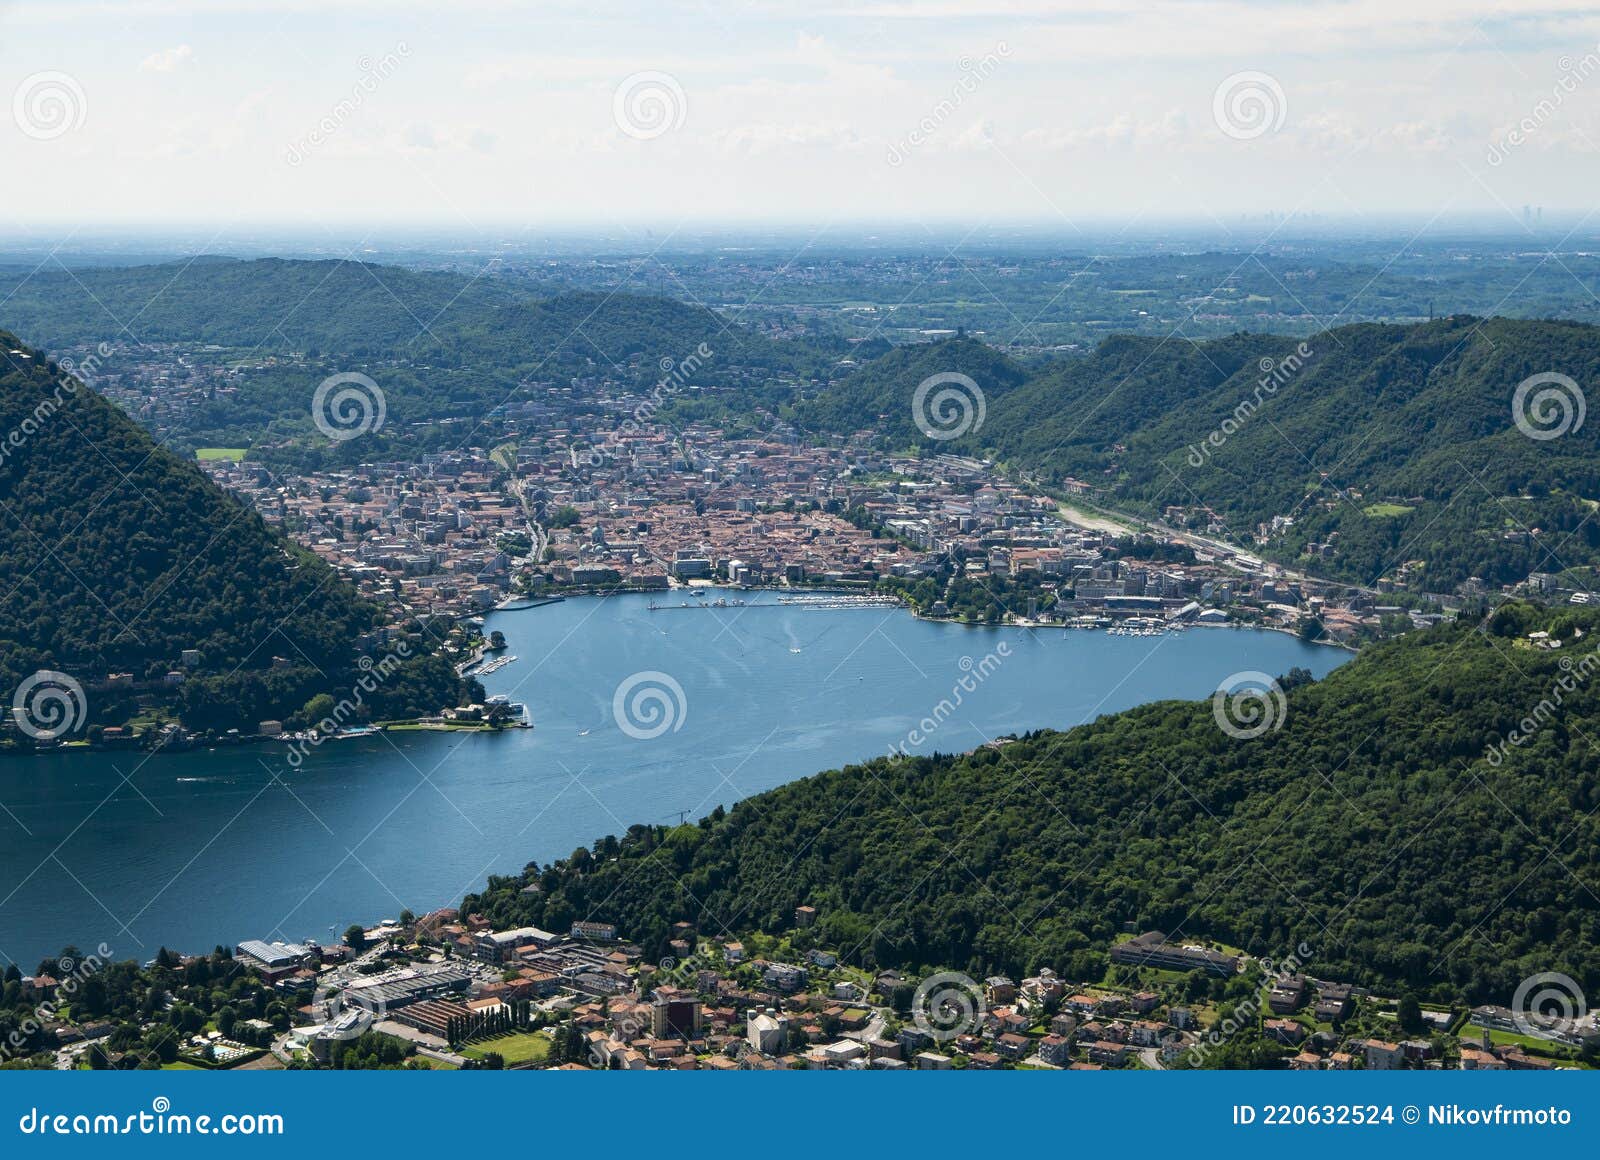 landscape of como from mount bisbino